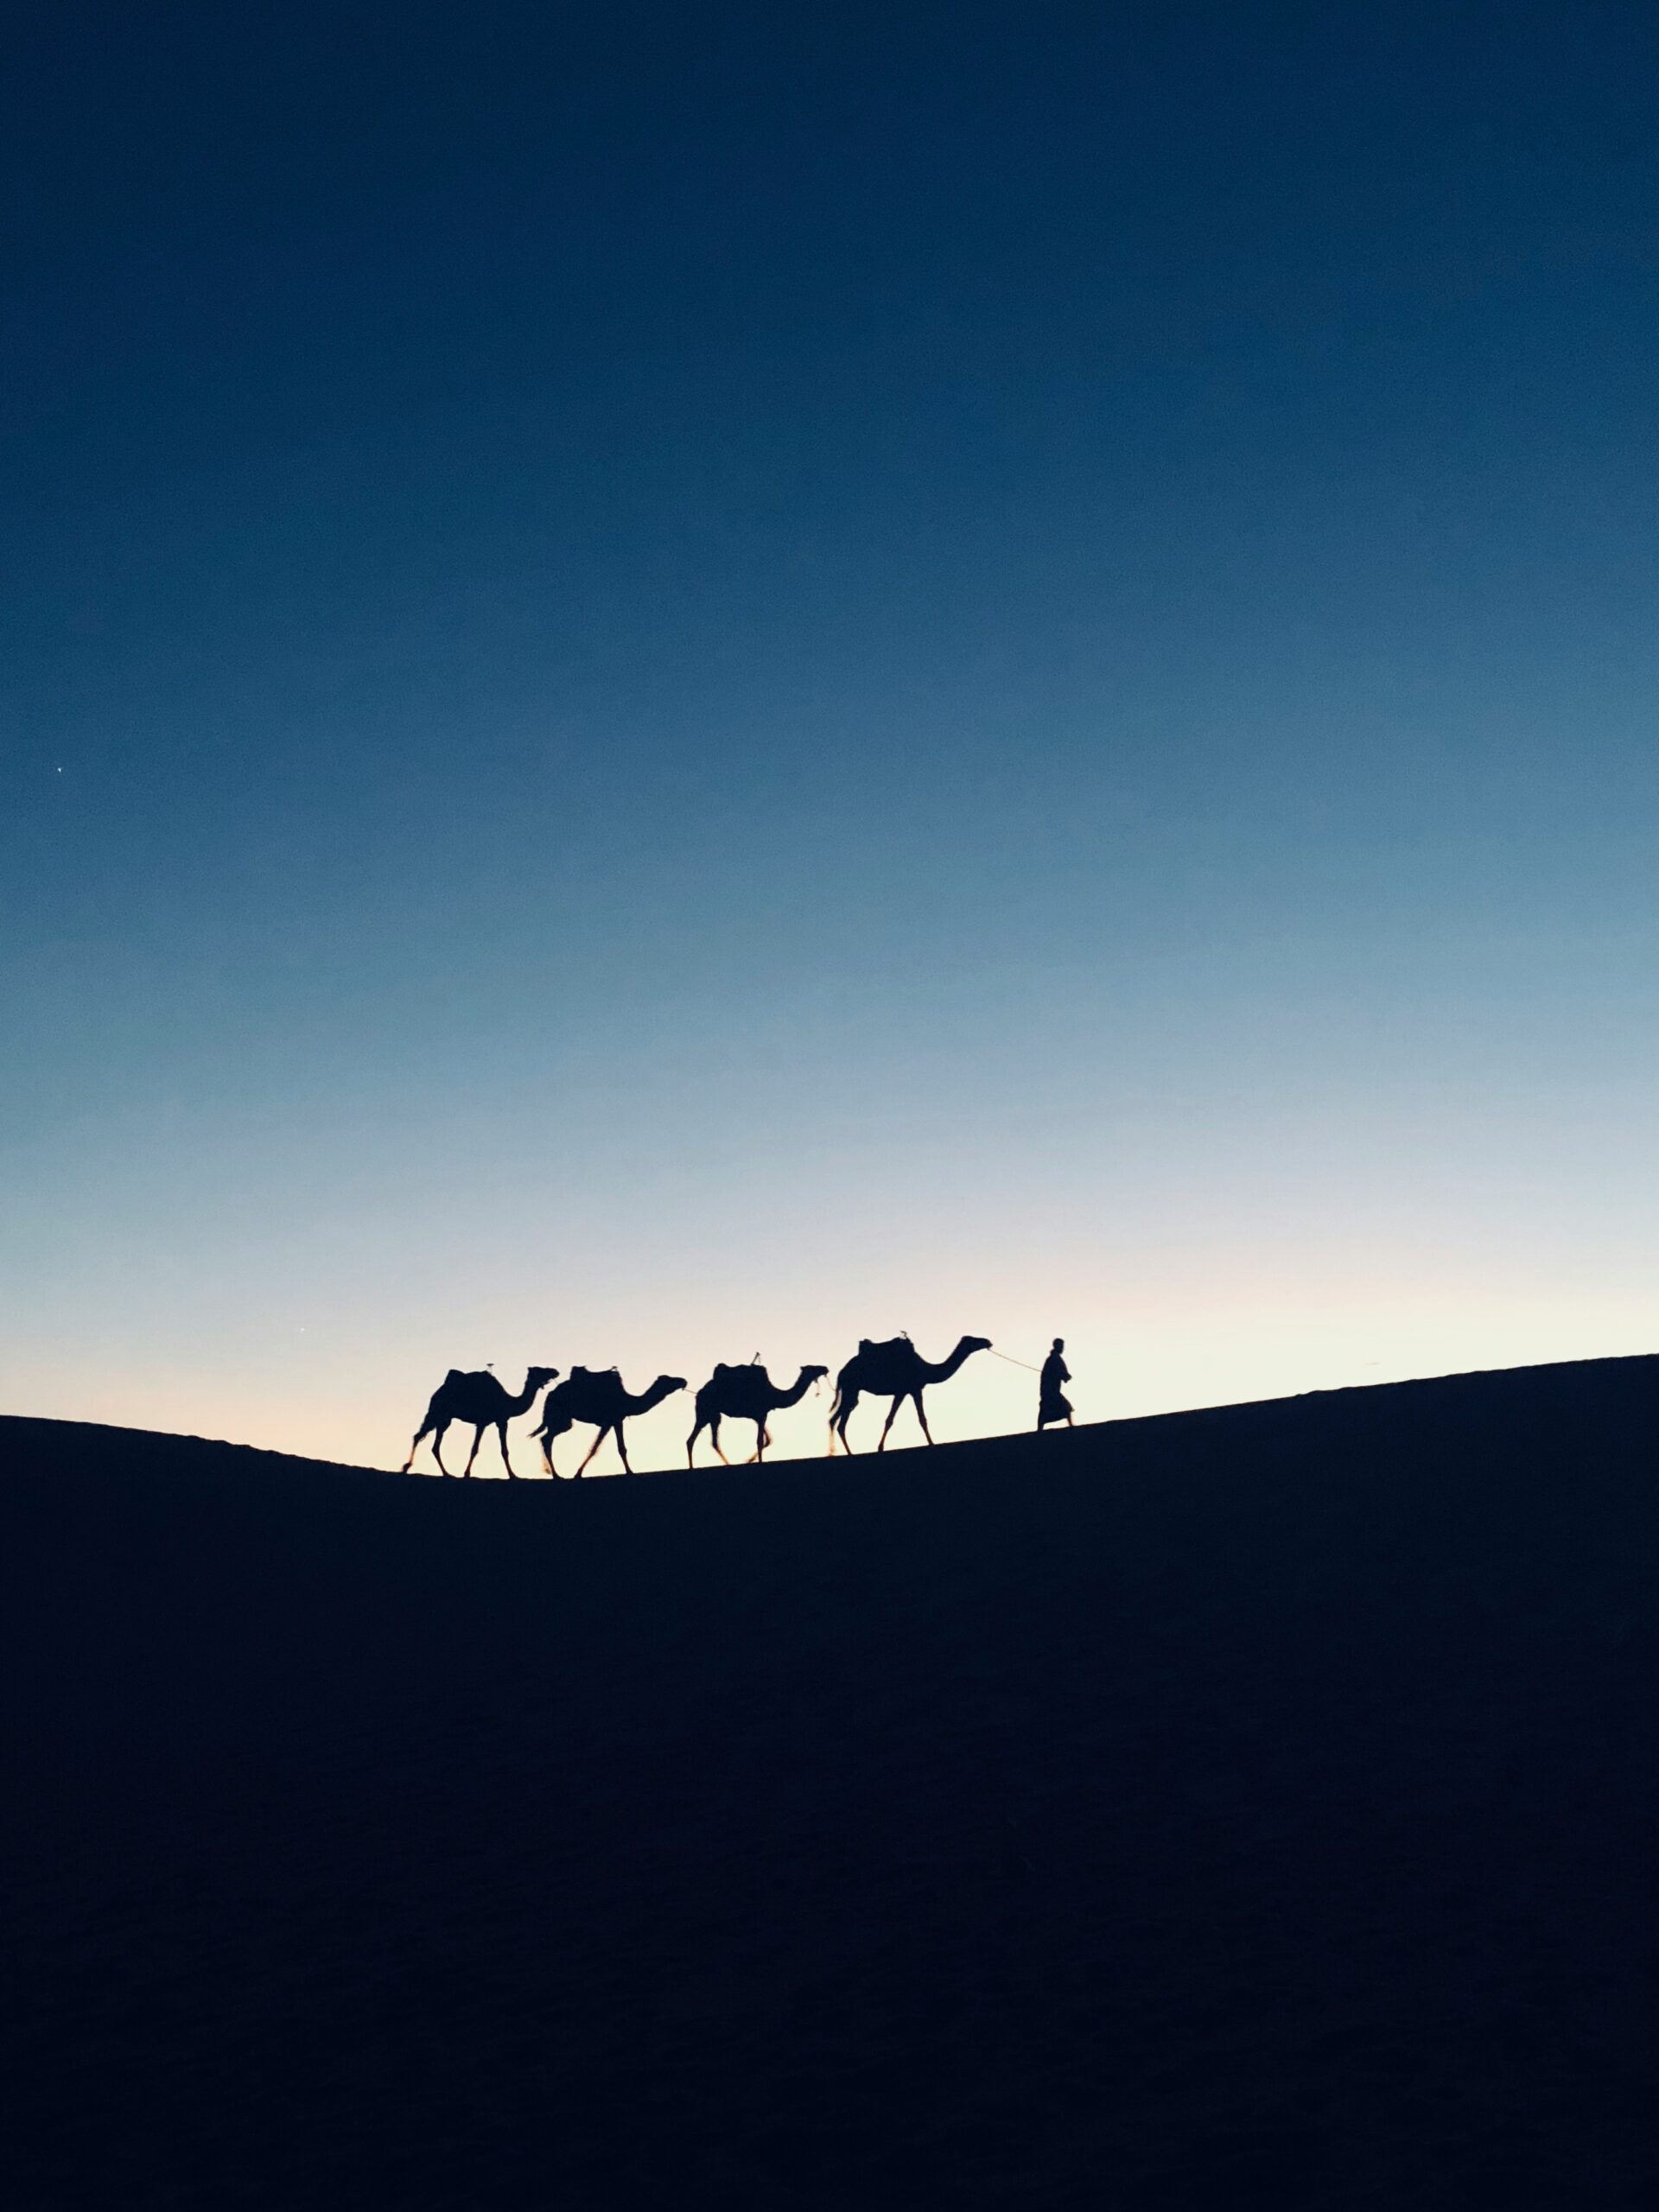 how to repent a sin - image of camels in desert